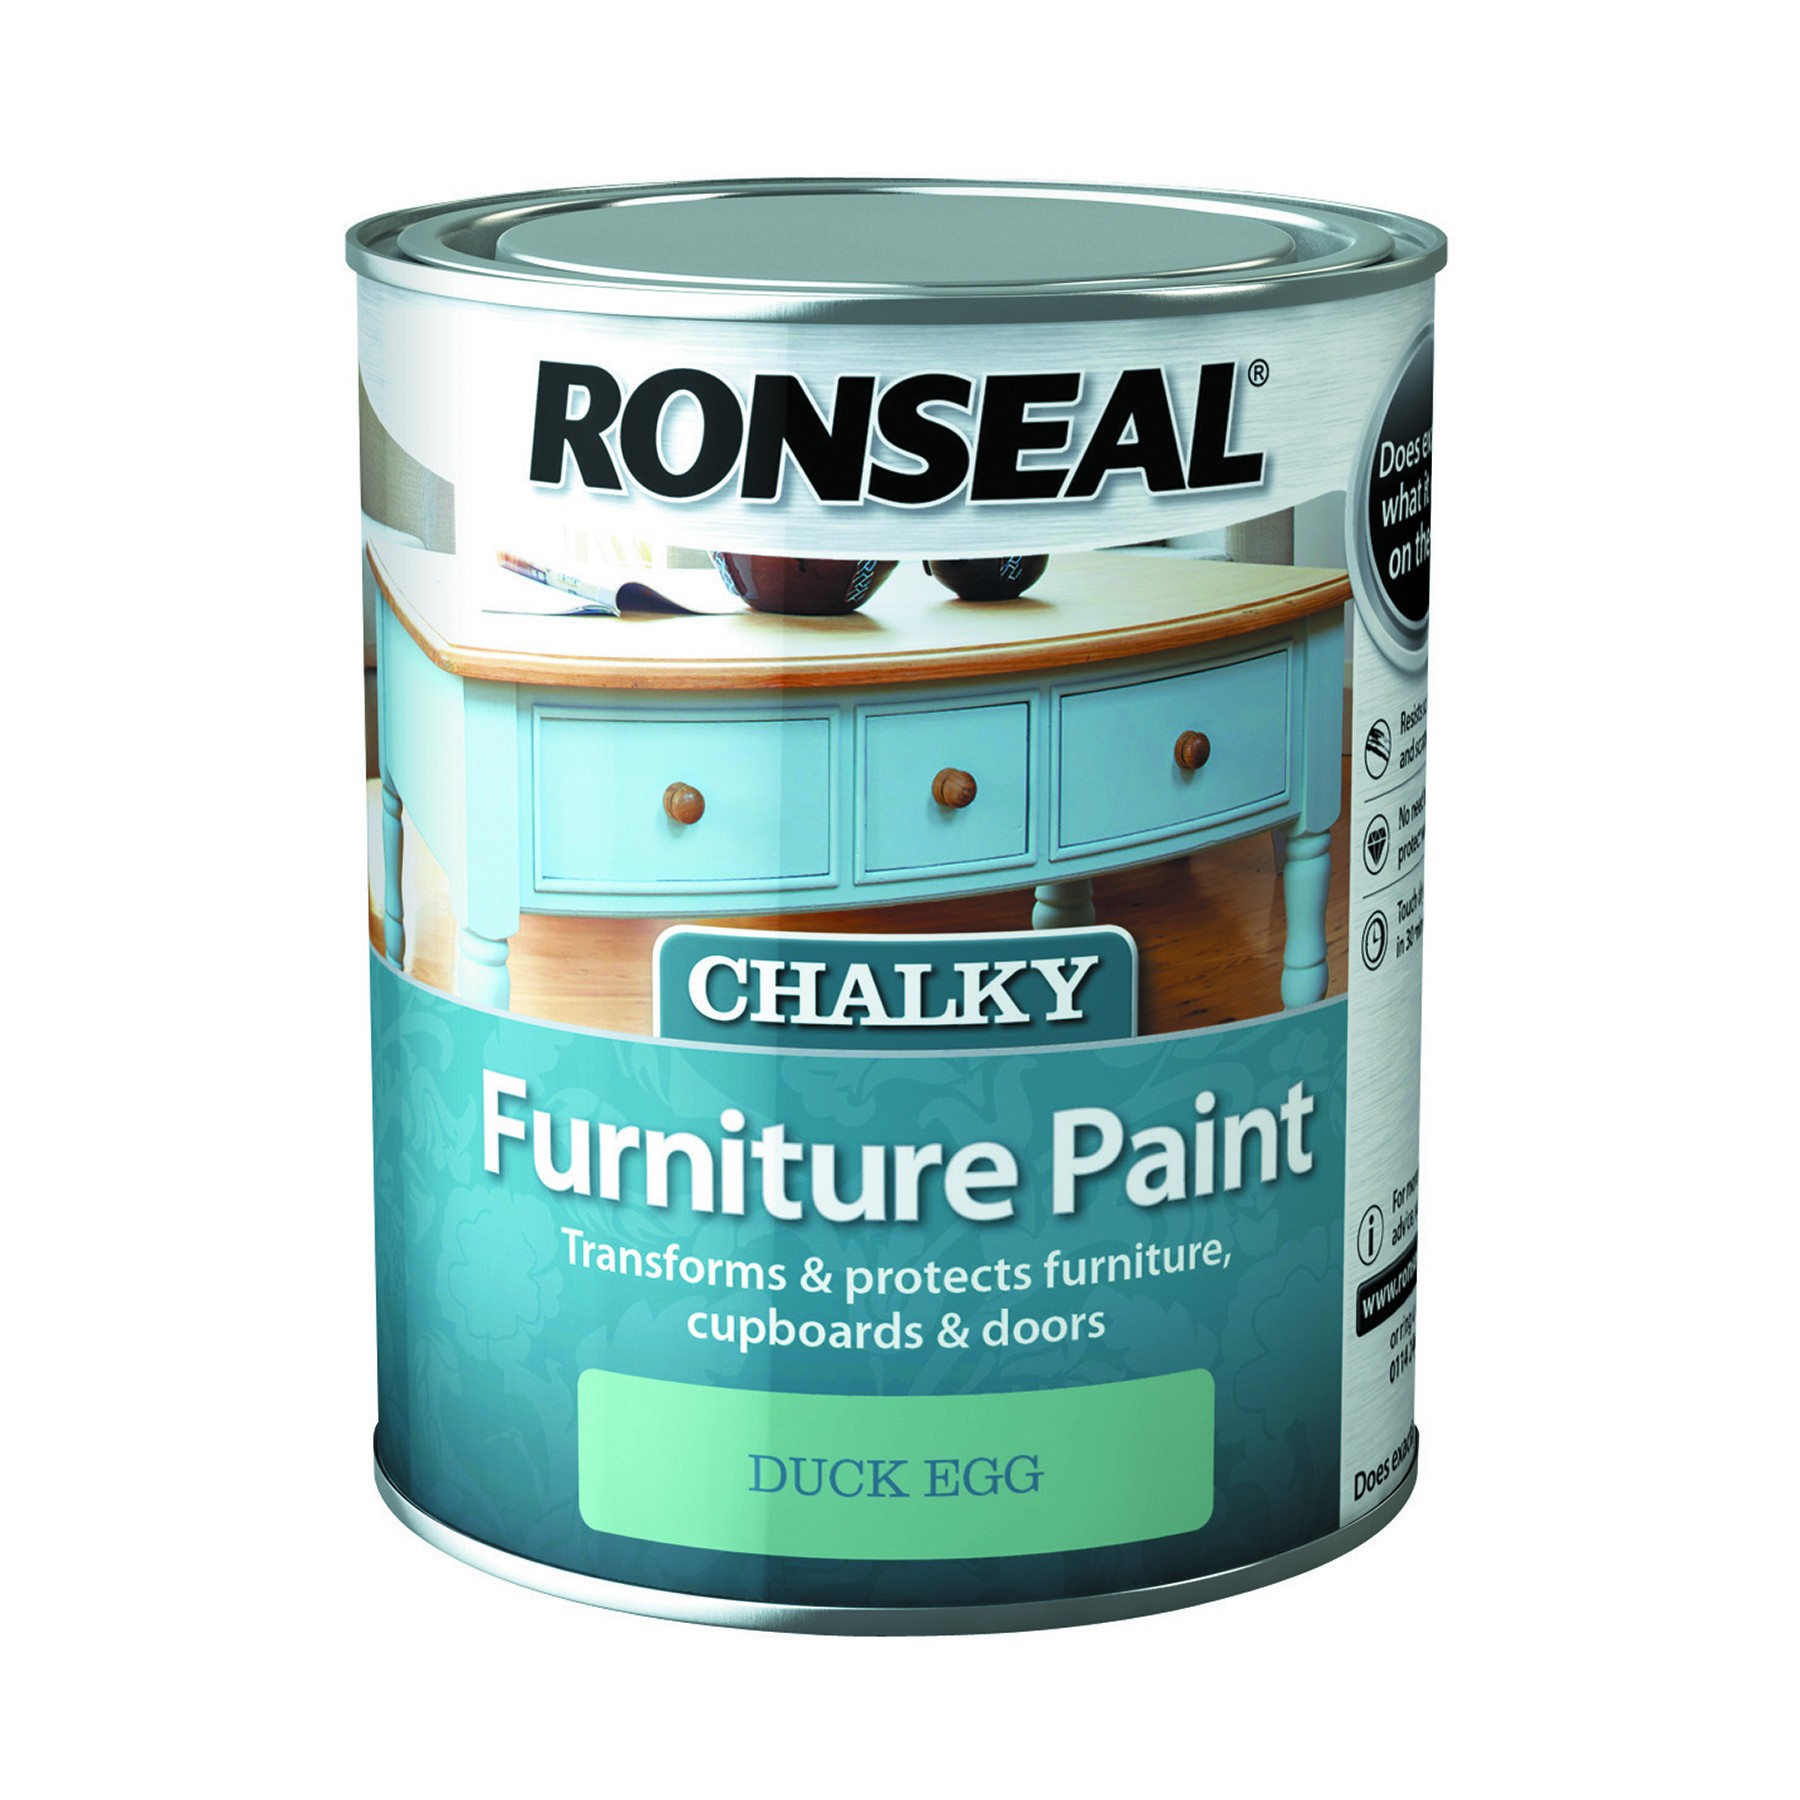 Ronseal Chalky Furniture Paint 750ml Duck Egg [RGS37486]